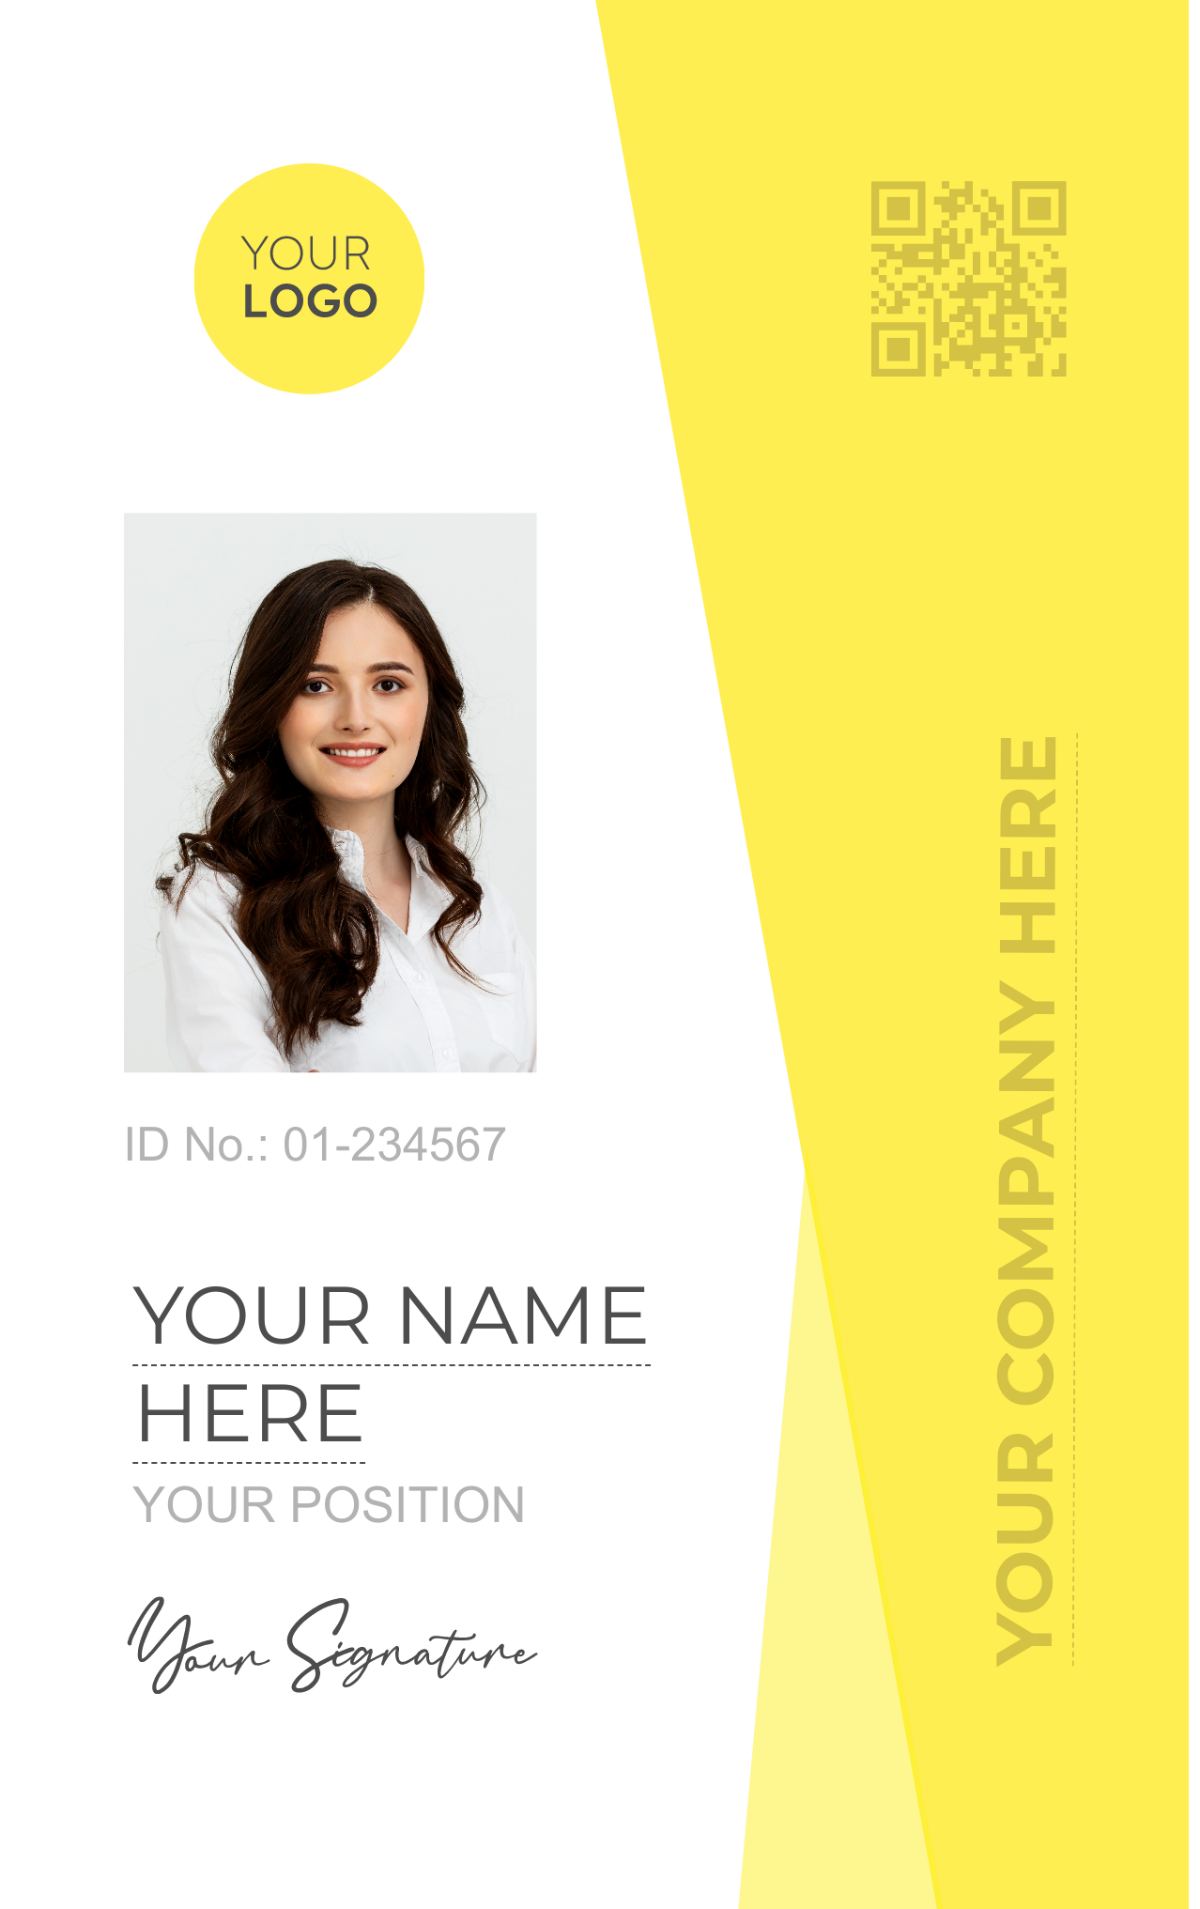 IT Manager ID Card Template